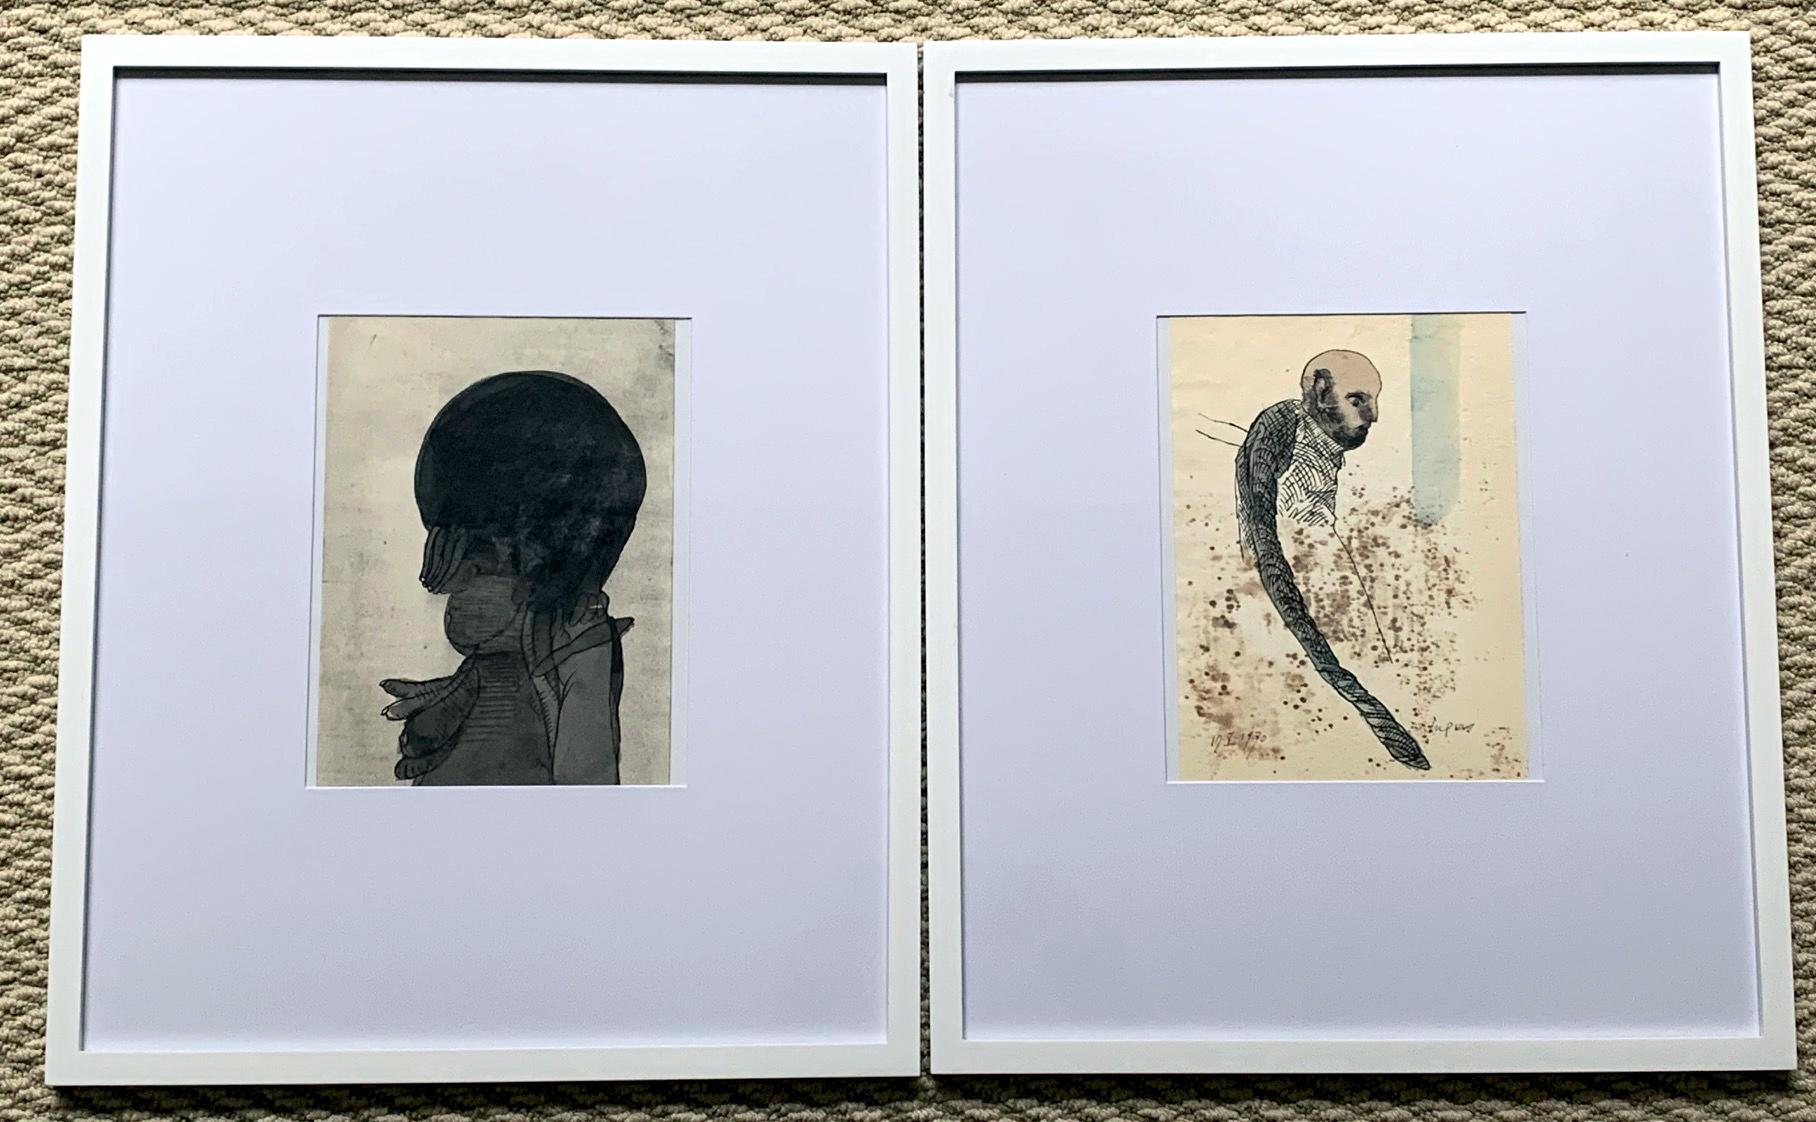 Two ink and water color on paper by Mexican artist Jose Luis Cuevas (1934-2017). Presented in a pair of white frames. One with both side drawn. Both depict a distorted figure commonly seen in the artist's work. Some Spanish writing can be seen as